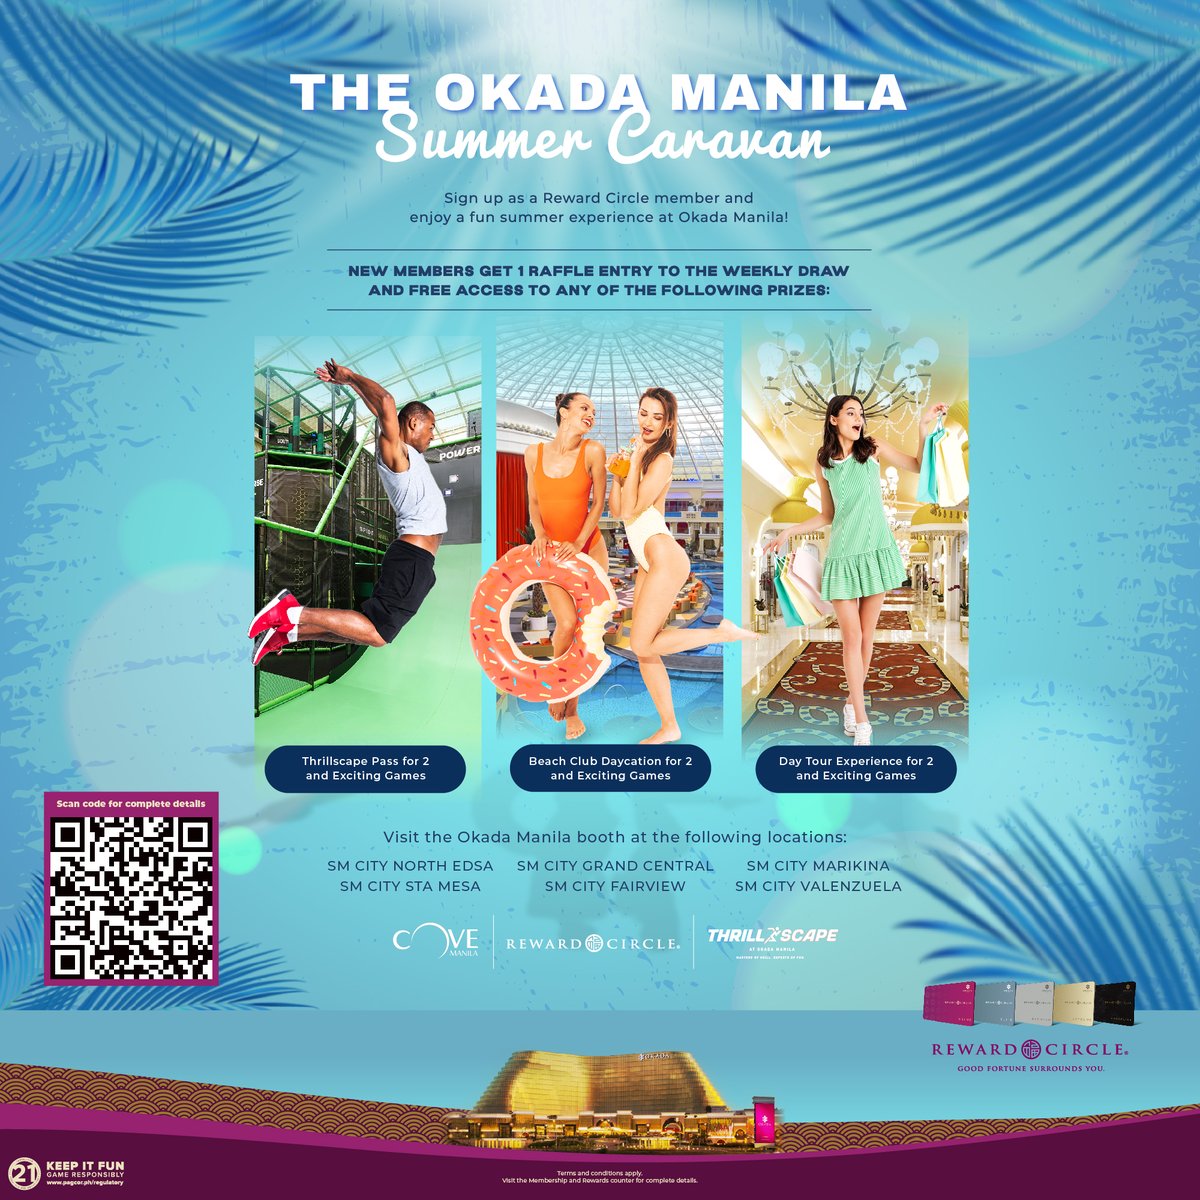 The Okada Manila Summer Caravan rolls on to the north! First stop: SM City Fairview. Drop by the Okada Manila booth and sign up as a Reward Circle member to win guaranteed prizes. Visit okdmnl.ph/SummerCaravan for complete details.